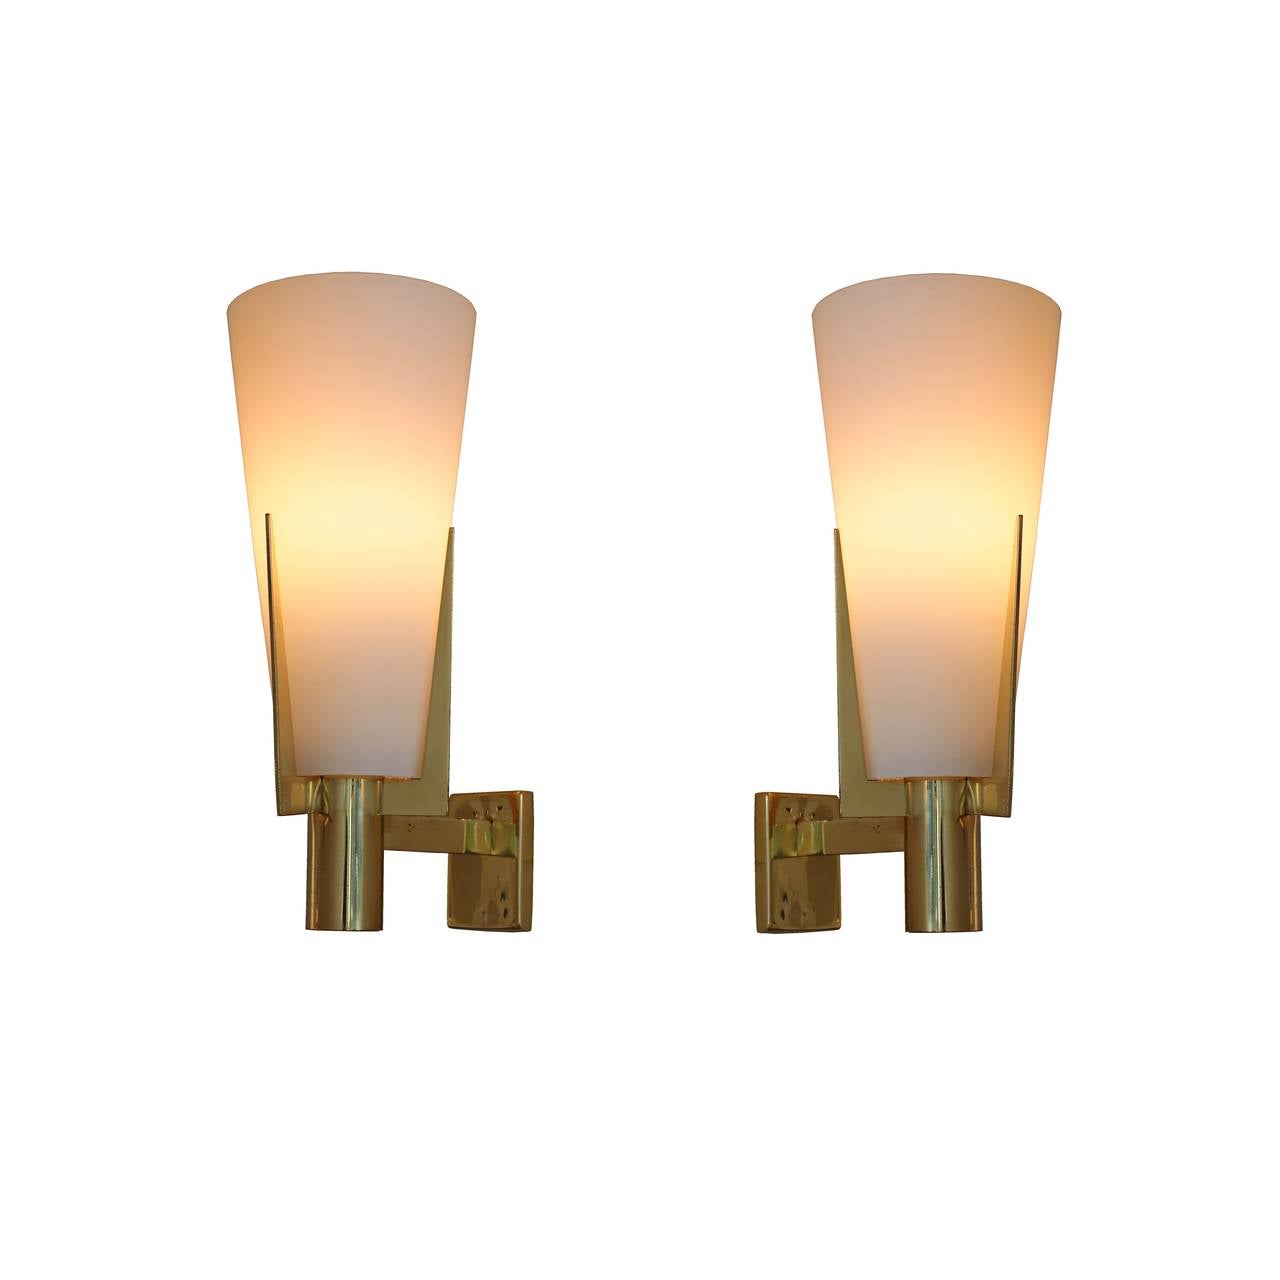 Eight wall lights in brass and glass attributed to Stilnovo.